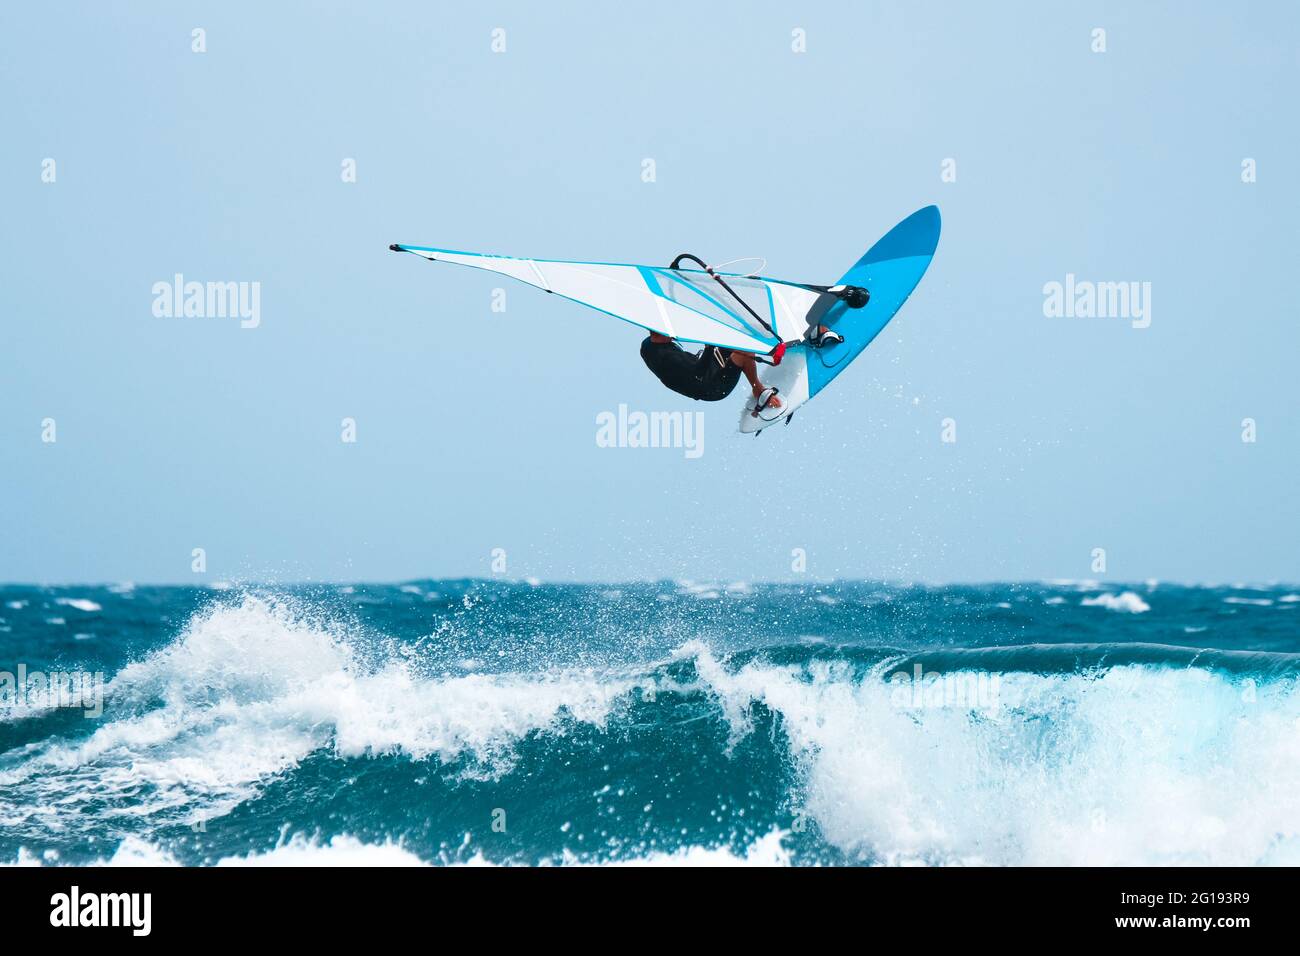 aquatic sports: windsurfer jumping on the waves during the summer Stock Photo